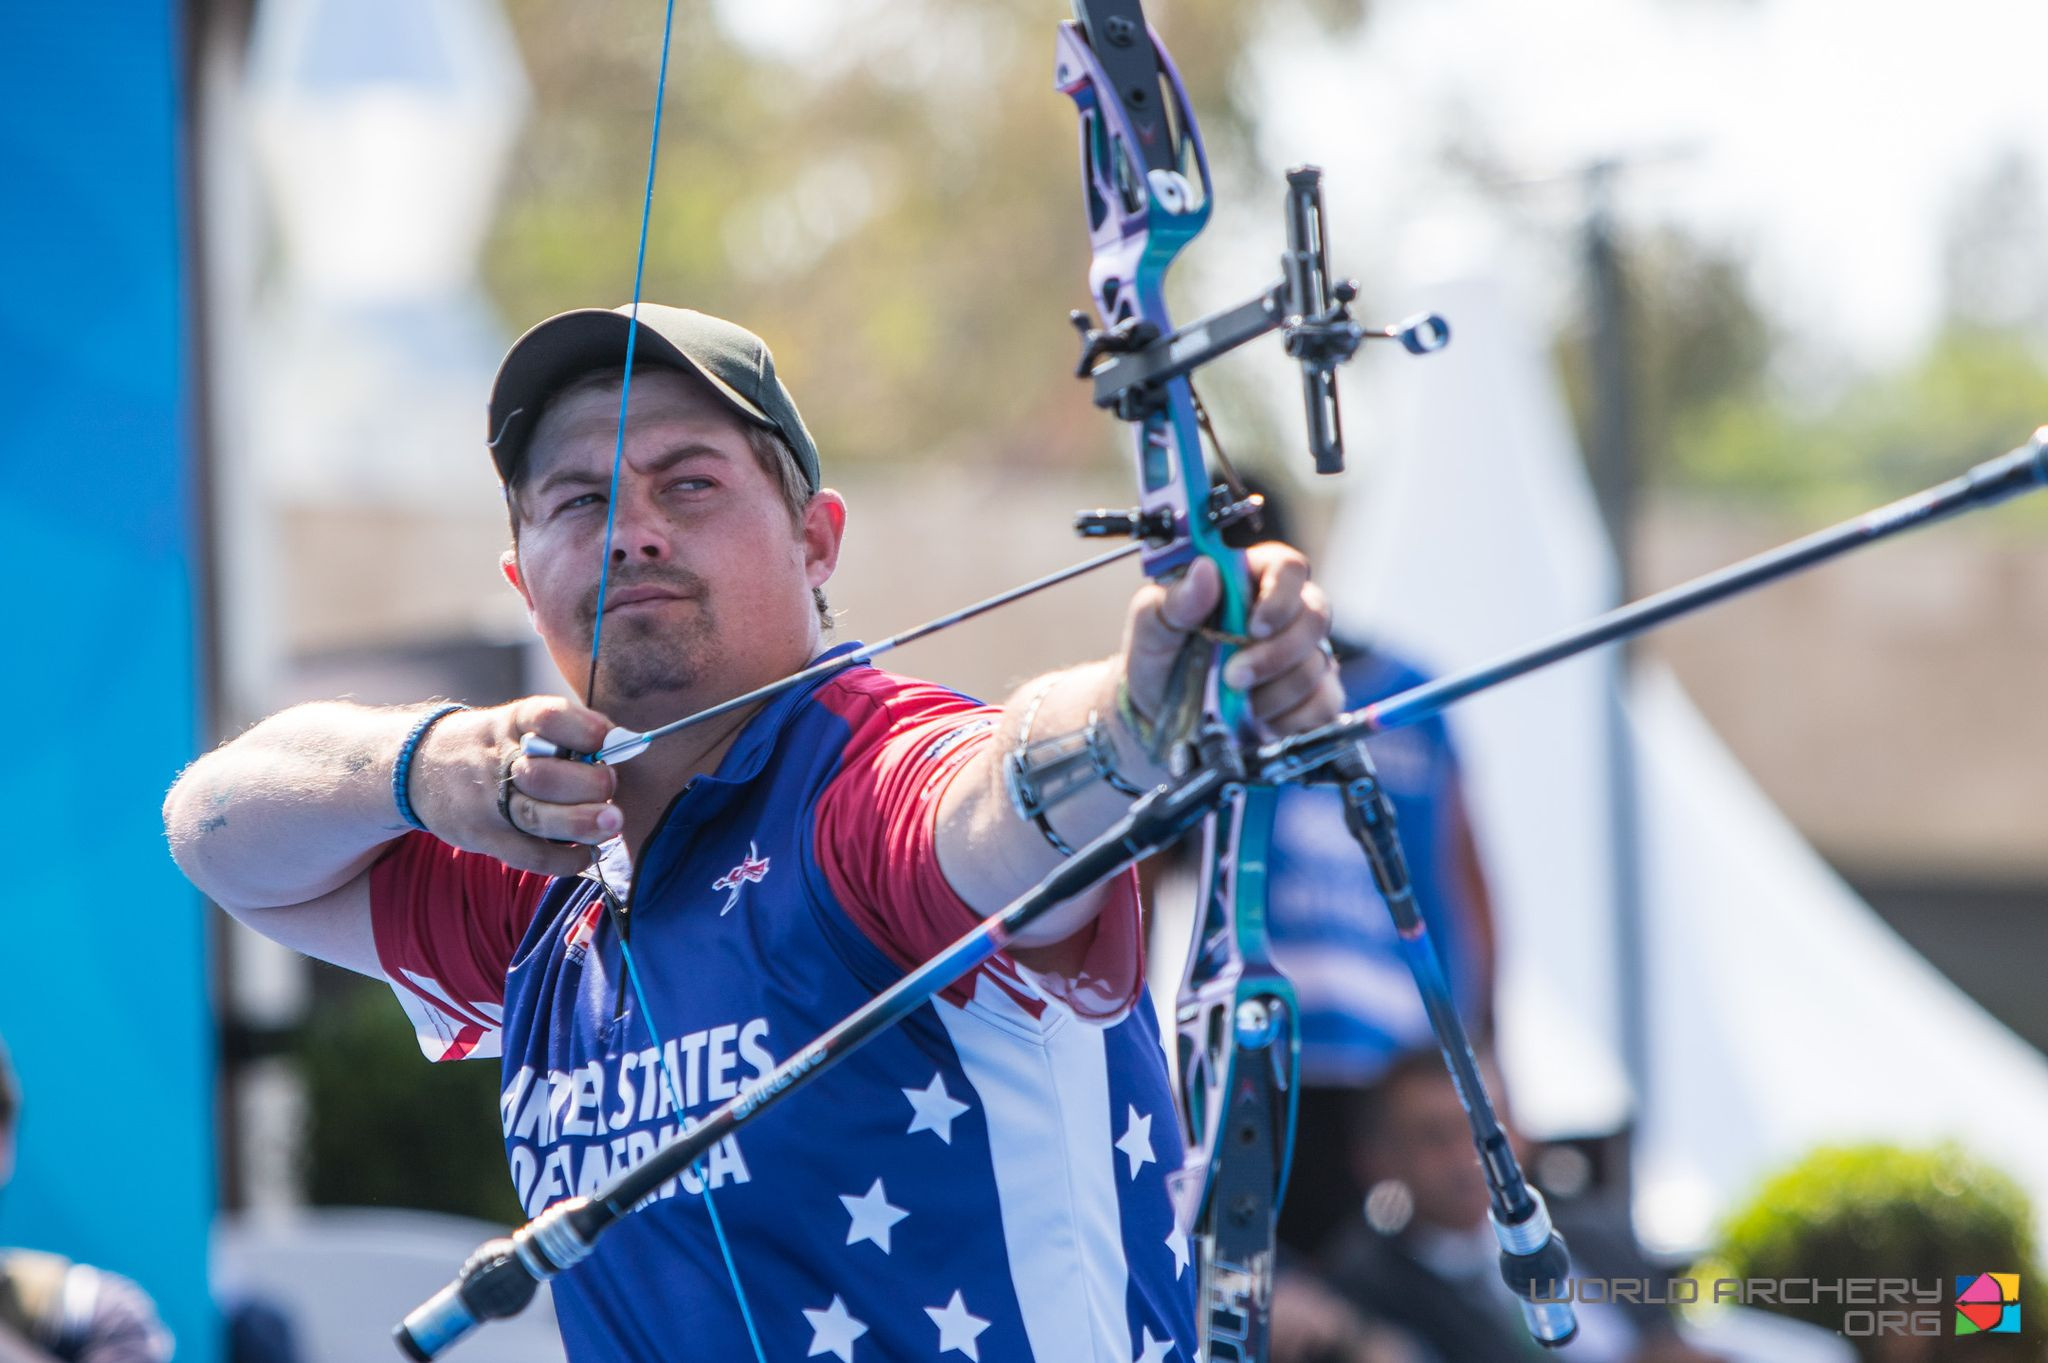 Brady Ellison came out on top in the men's recurve standings ©Getty Images